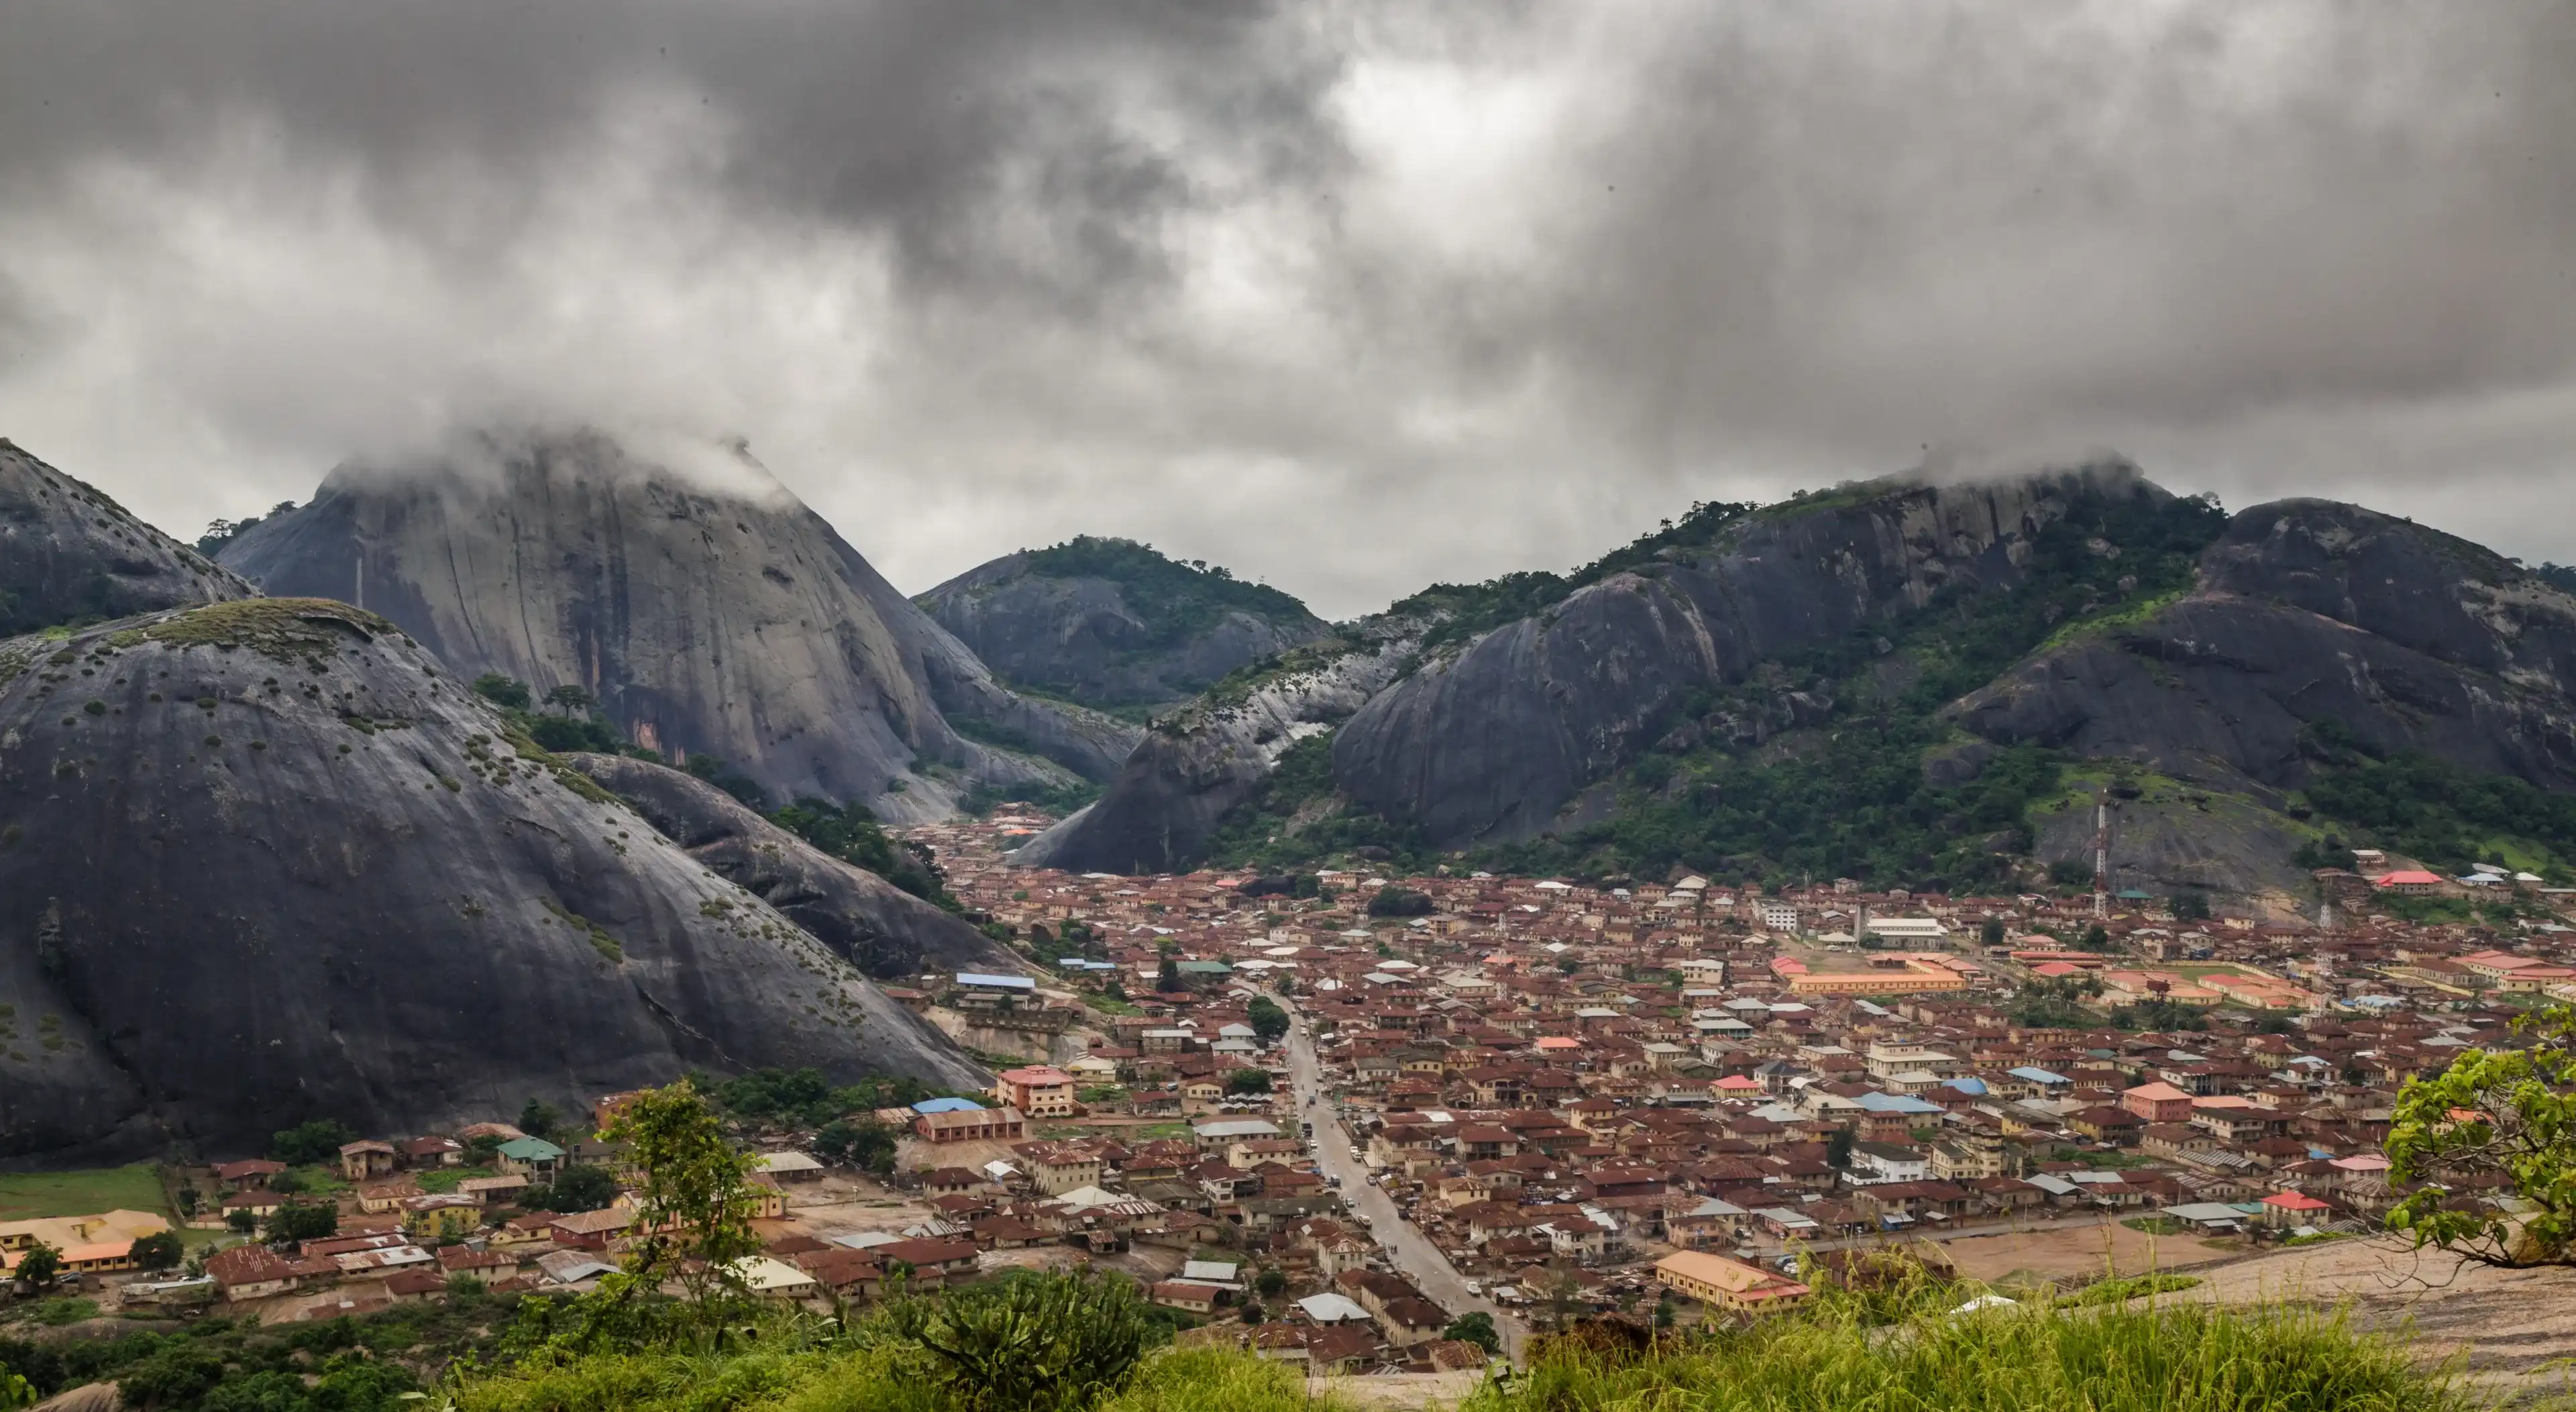 Idanre Hill , an awesome and beautiful natural landscapes in Nigeria. The people people of Idanre lived on these massive rocks for over a hundread year. Just under 30 kilometres southwest of Akure, On